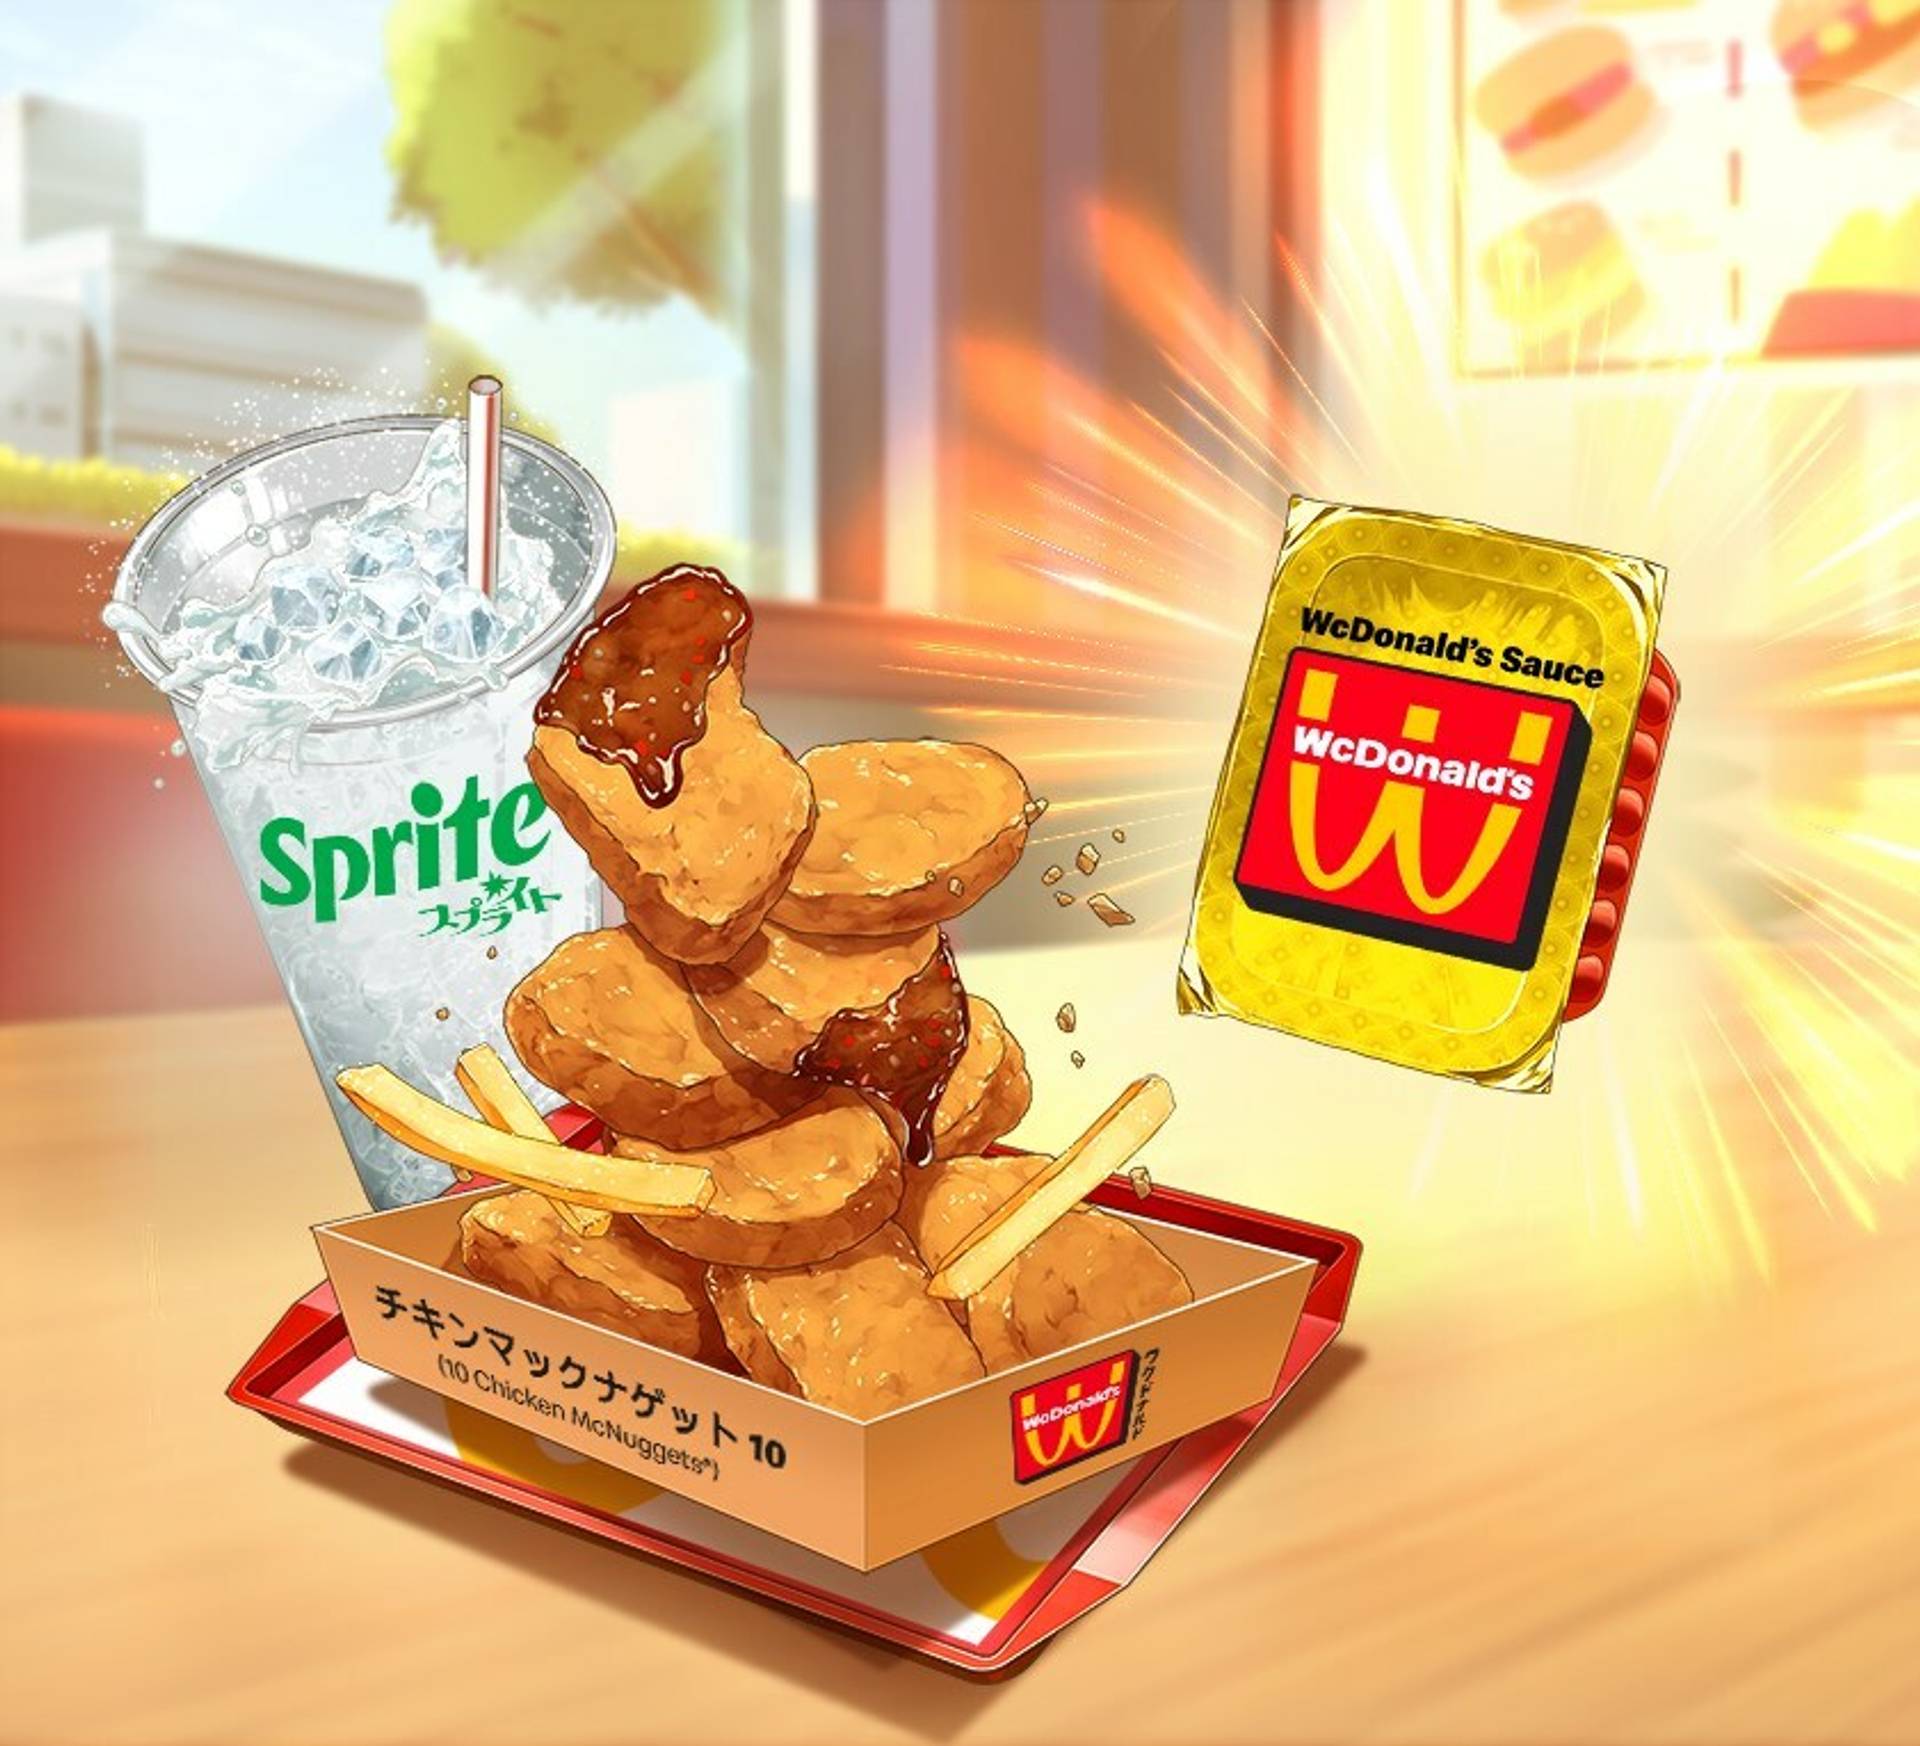 McDonalds taps anime fandom with limited series